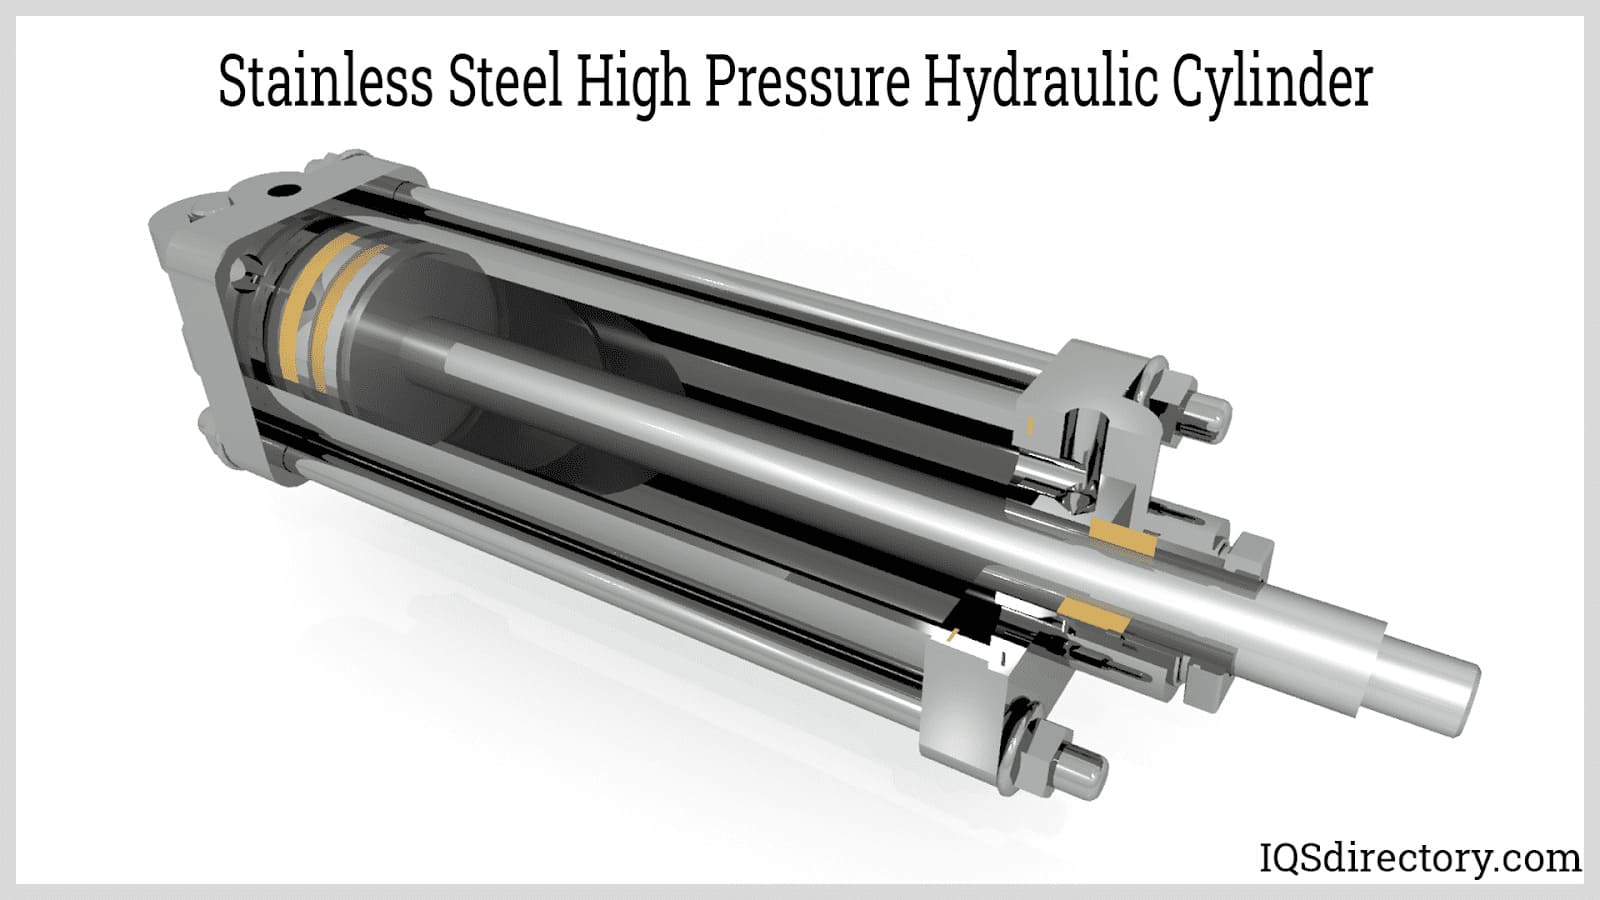 Different Types of Hydraulic Presses Explained - Worlifts